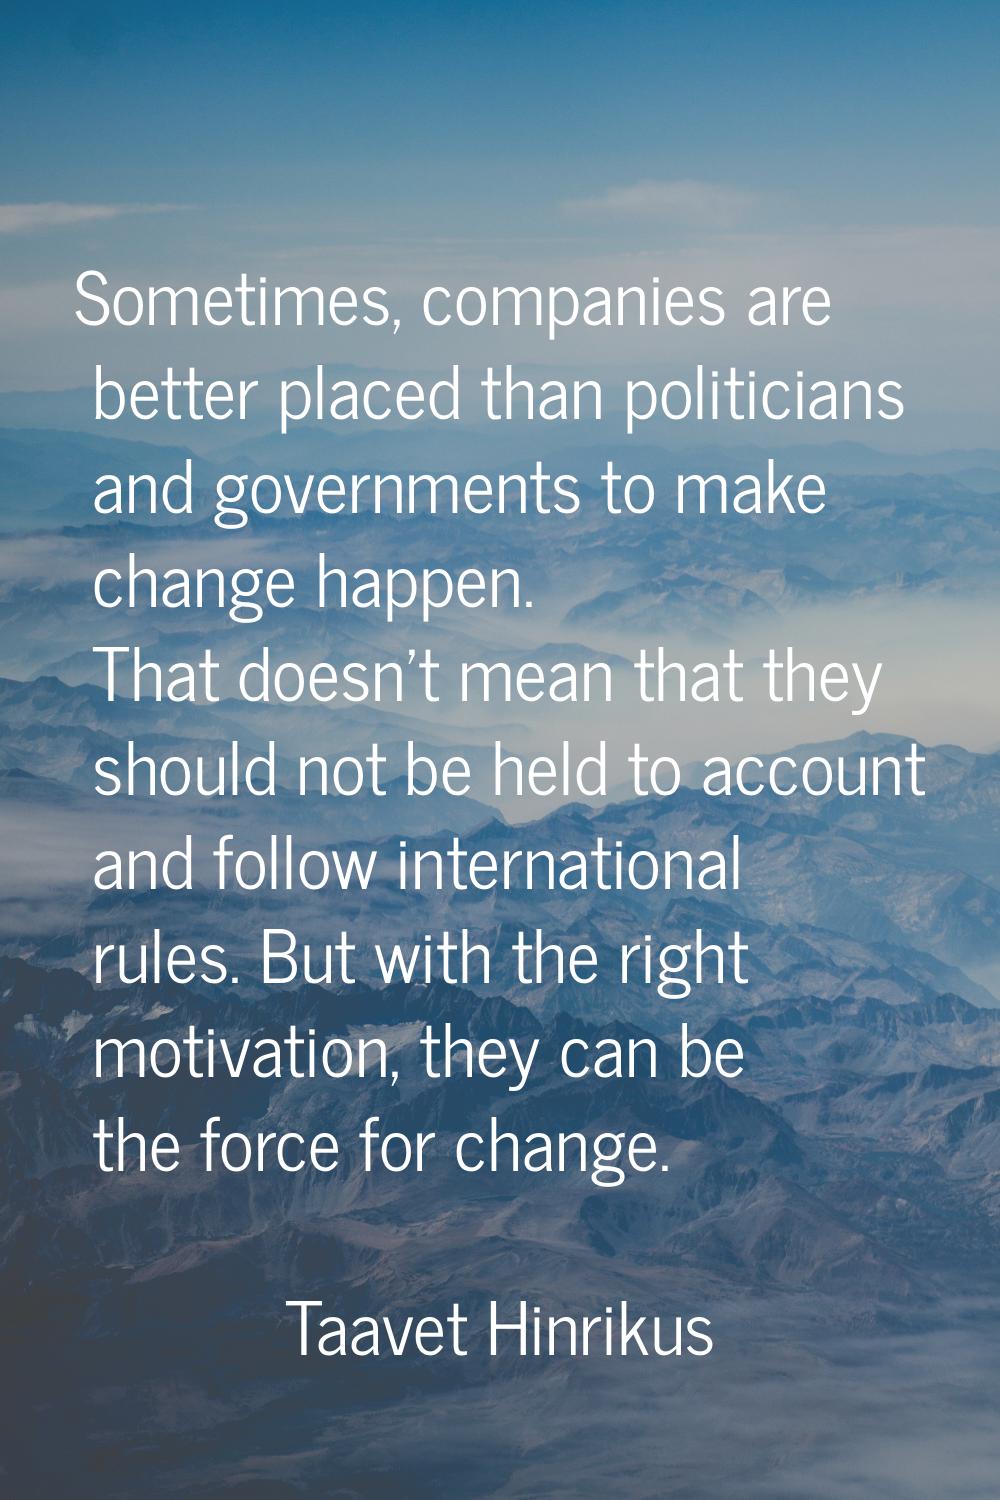 Sometimes, companies are better placed than politicians and governments to make change happen. That